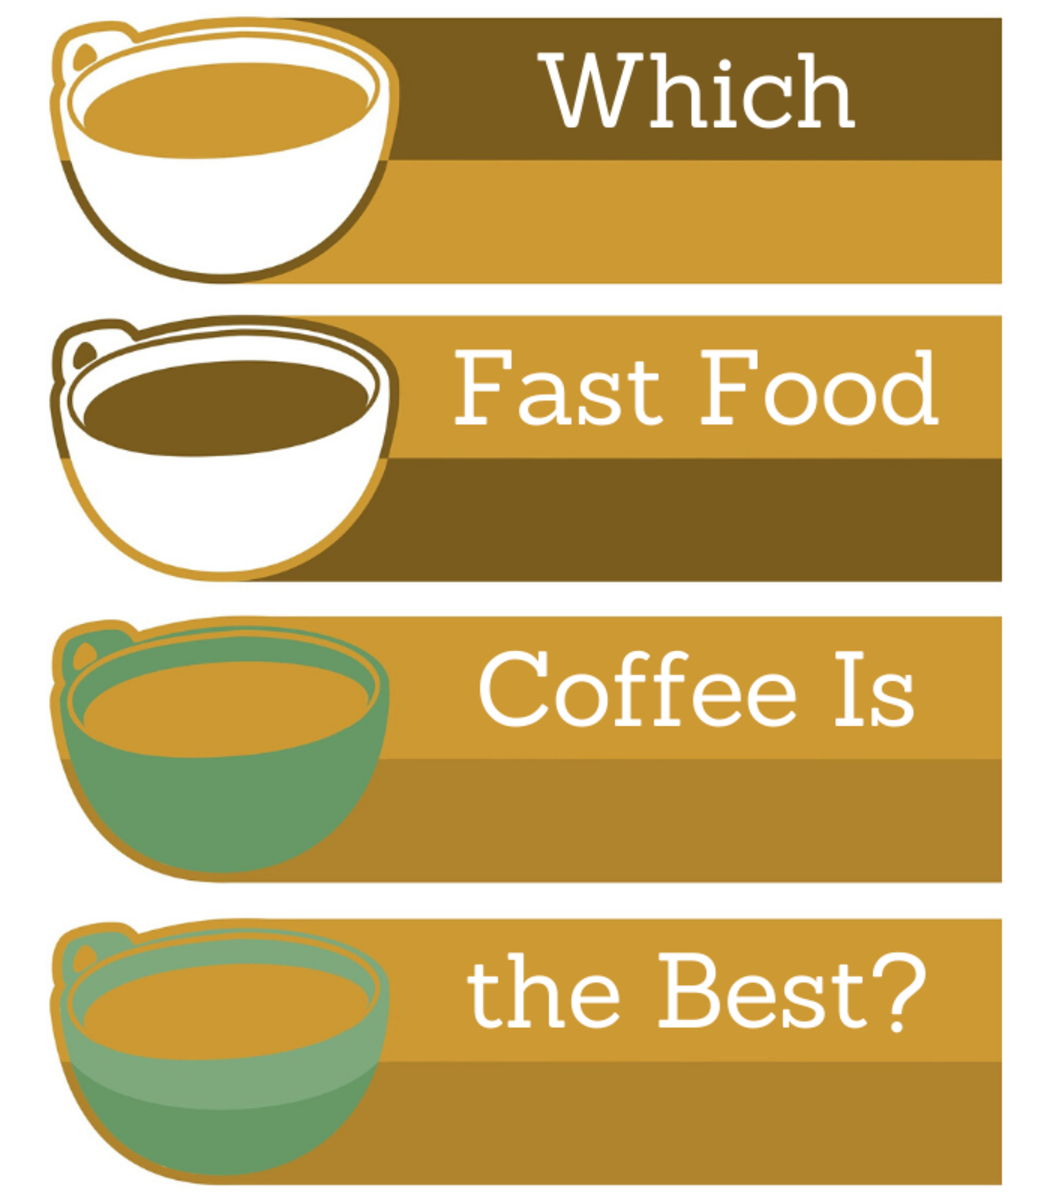 https://images.saymedia-content.com/.image/t_share/MTc0NDI3OTk0ODUxNTE3ODAw/the-besttest-cofee.png